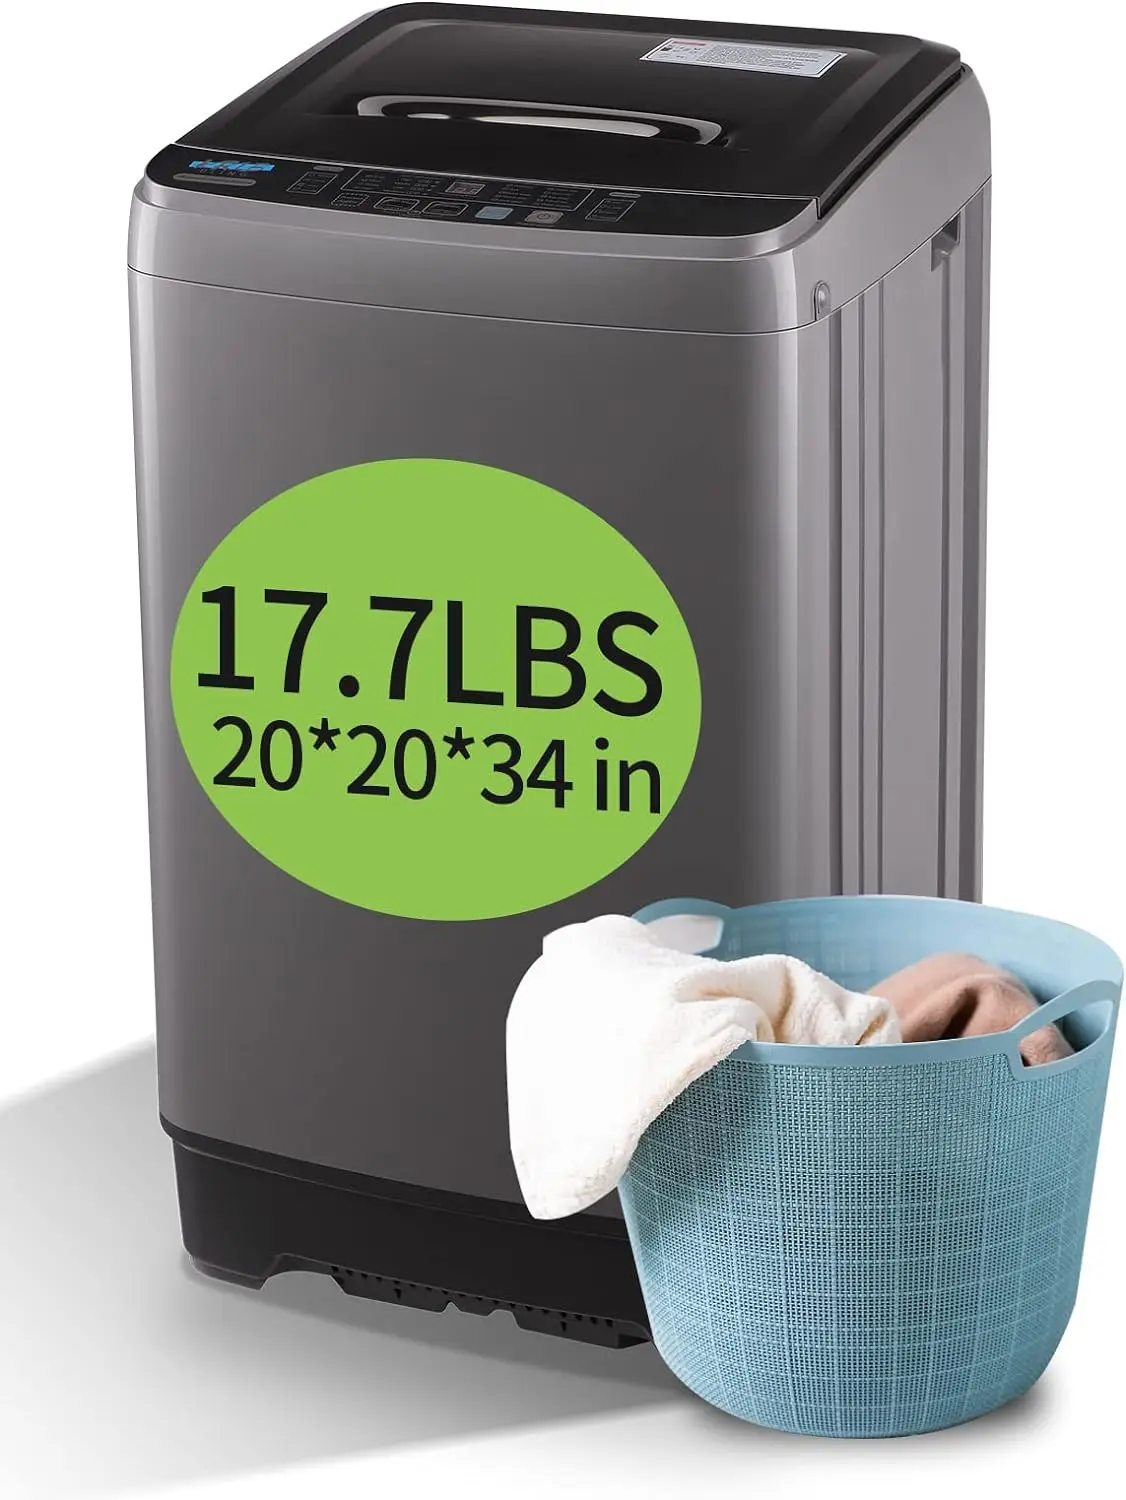 Full Automatic Washing Machine with LED Display, 17.7 lbs Portable Washe... - $347.69+